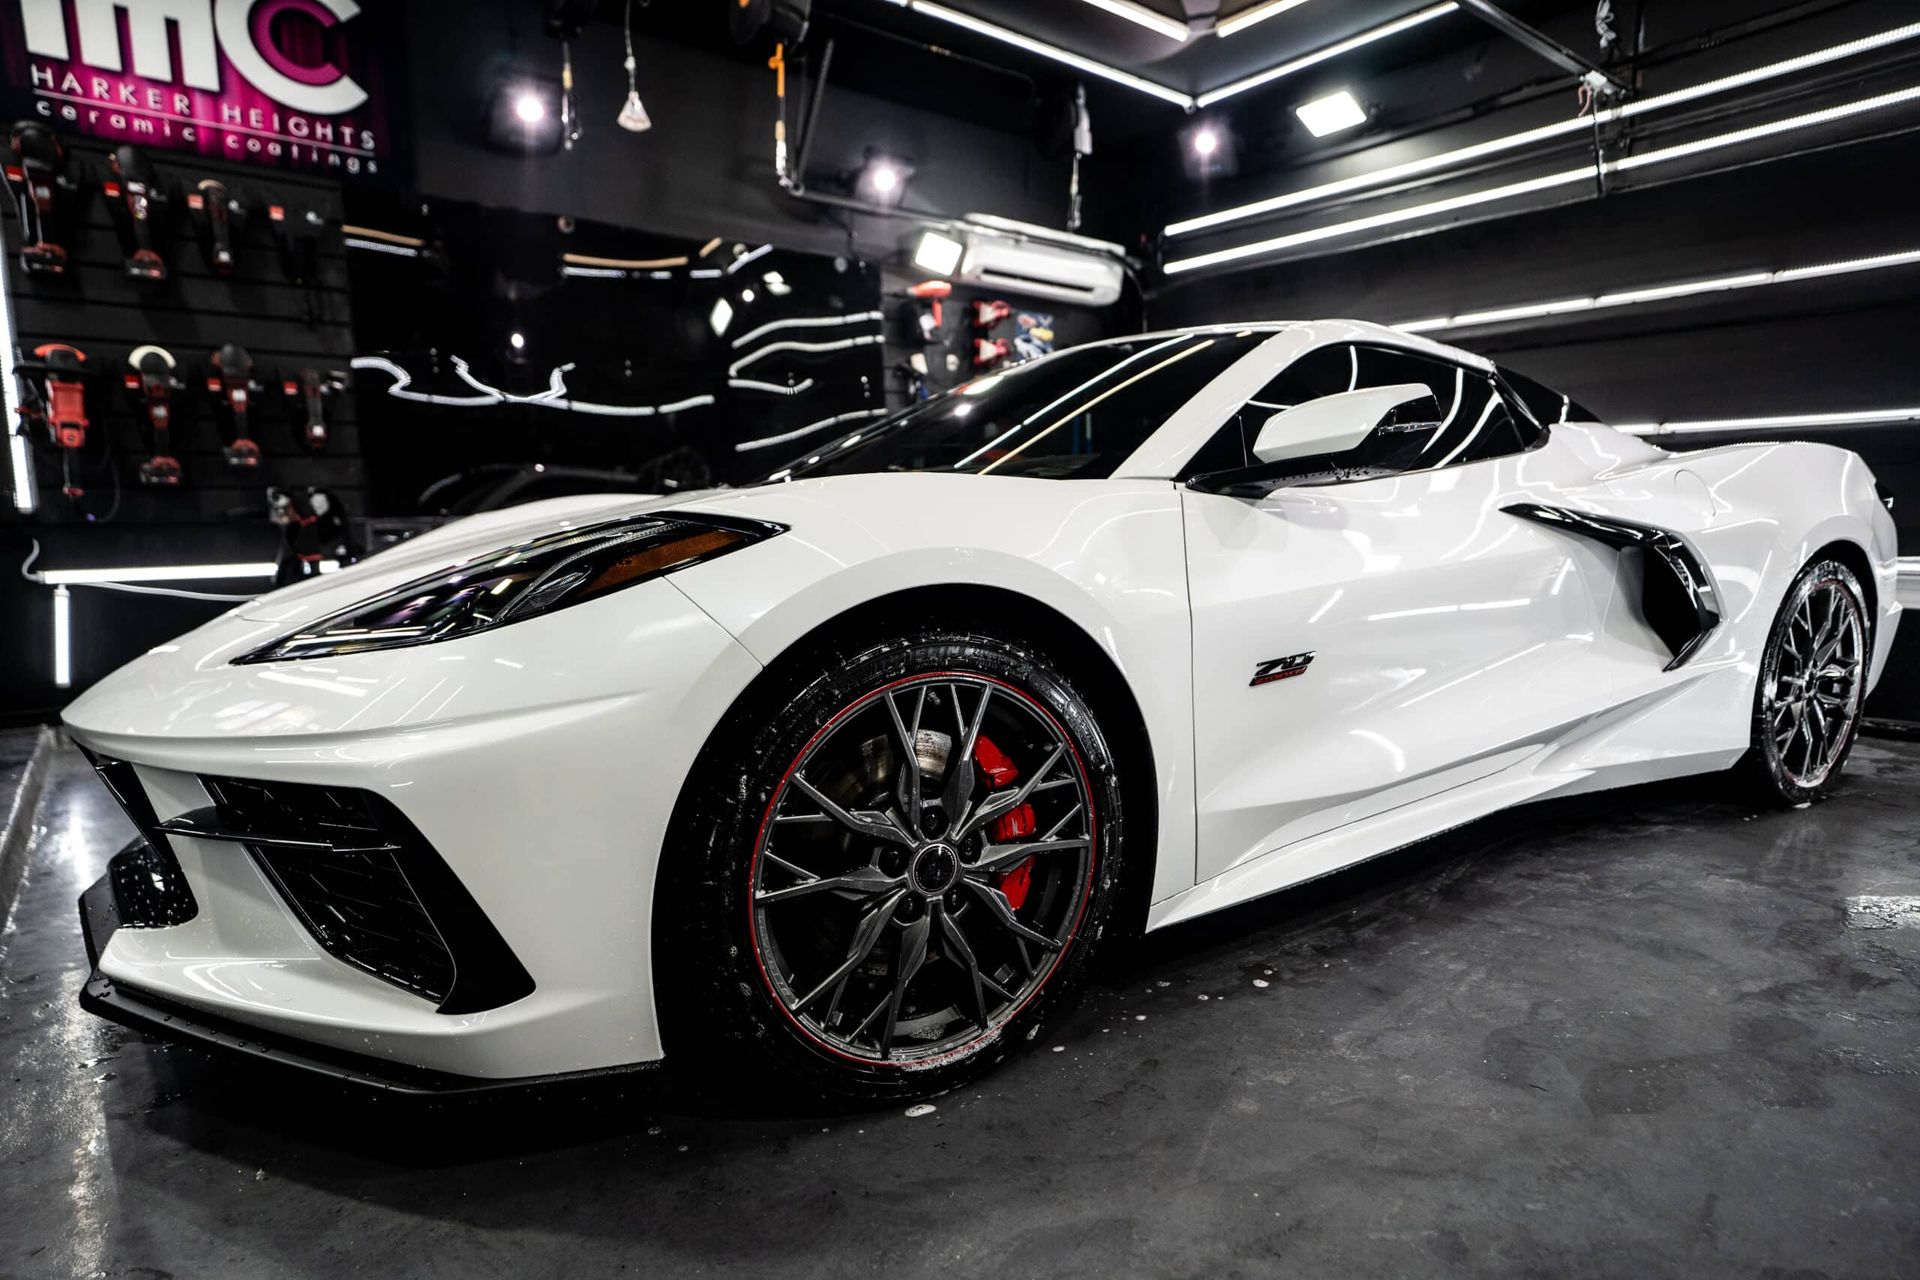 A white sports car is parked in a garage.